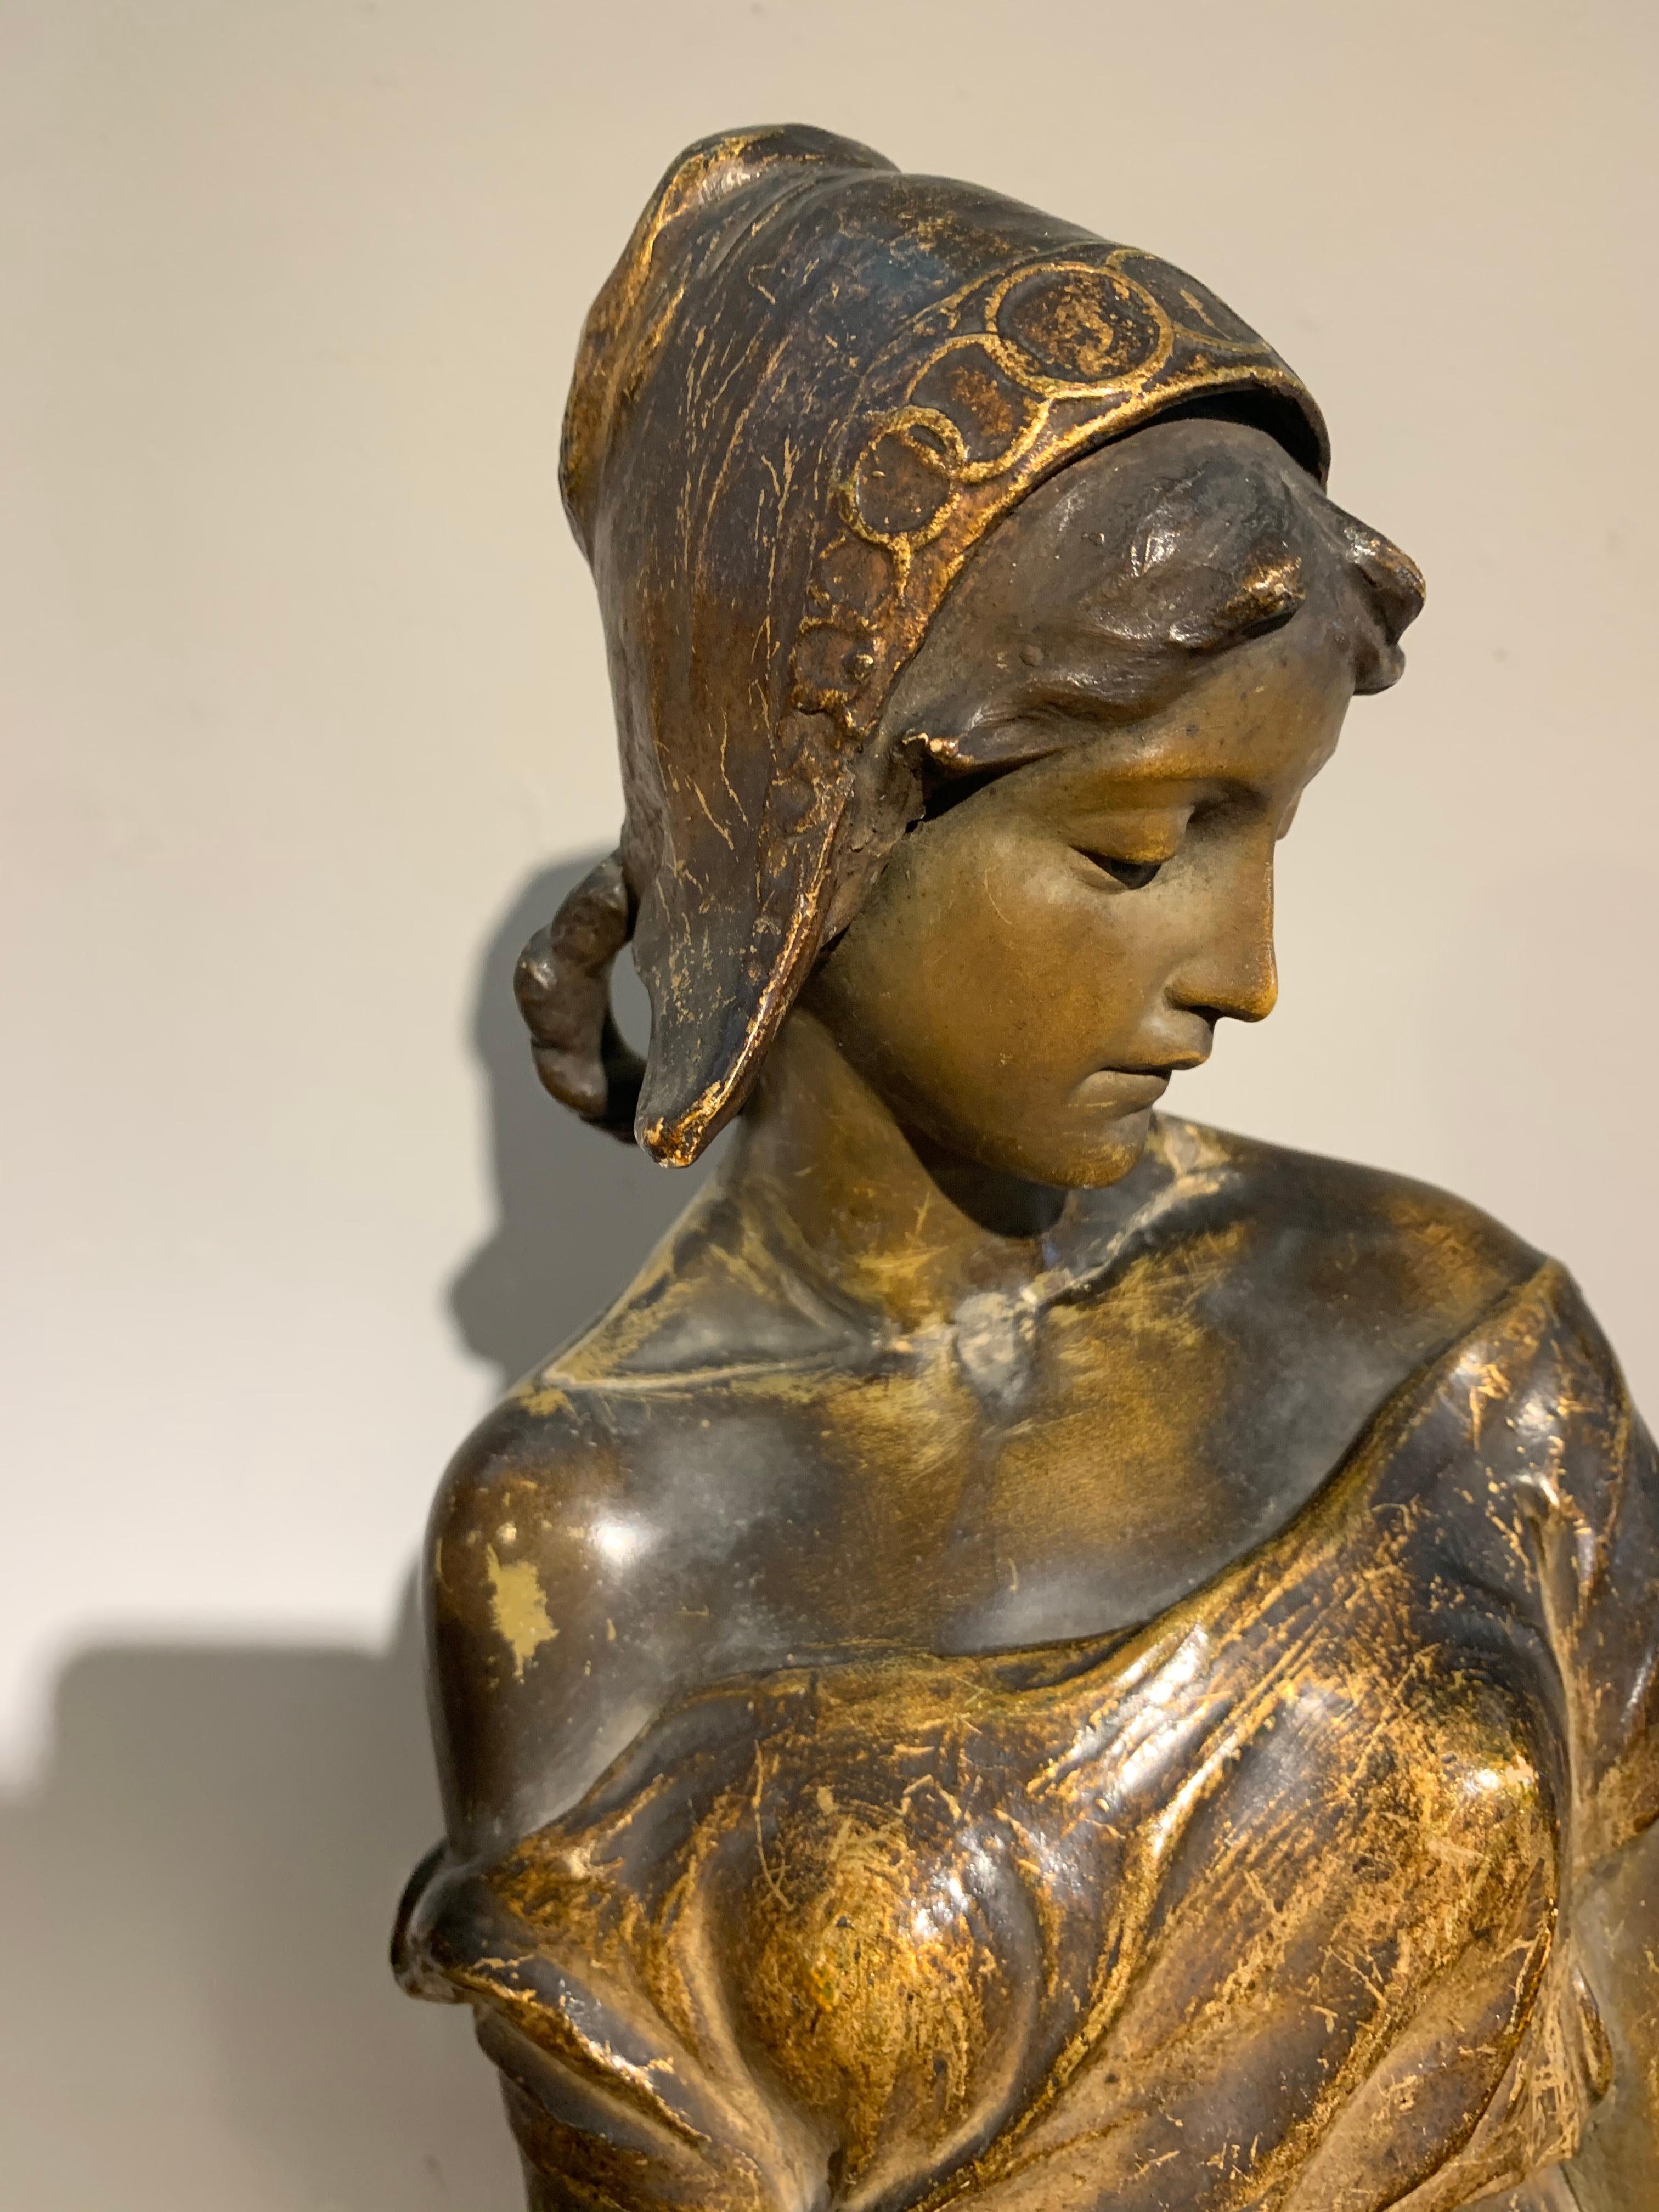 Late 19th century stunning Austrian terracotta sculpture of a female water carrier by Frederic Goldscheider, with the Frederic Goldscheider stamp and foundry numbers. 
Couple of bits of restoration 

Measures: Height 76 cm (30.0